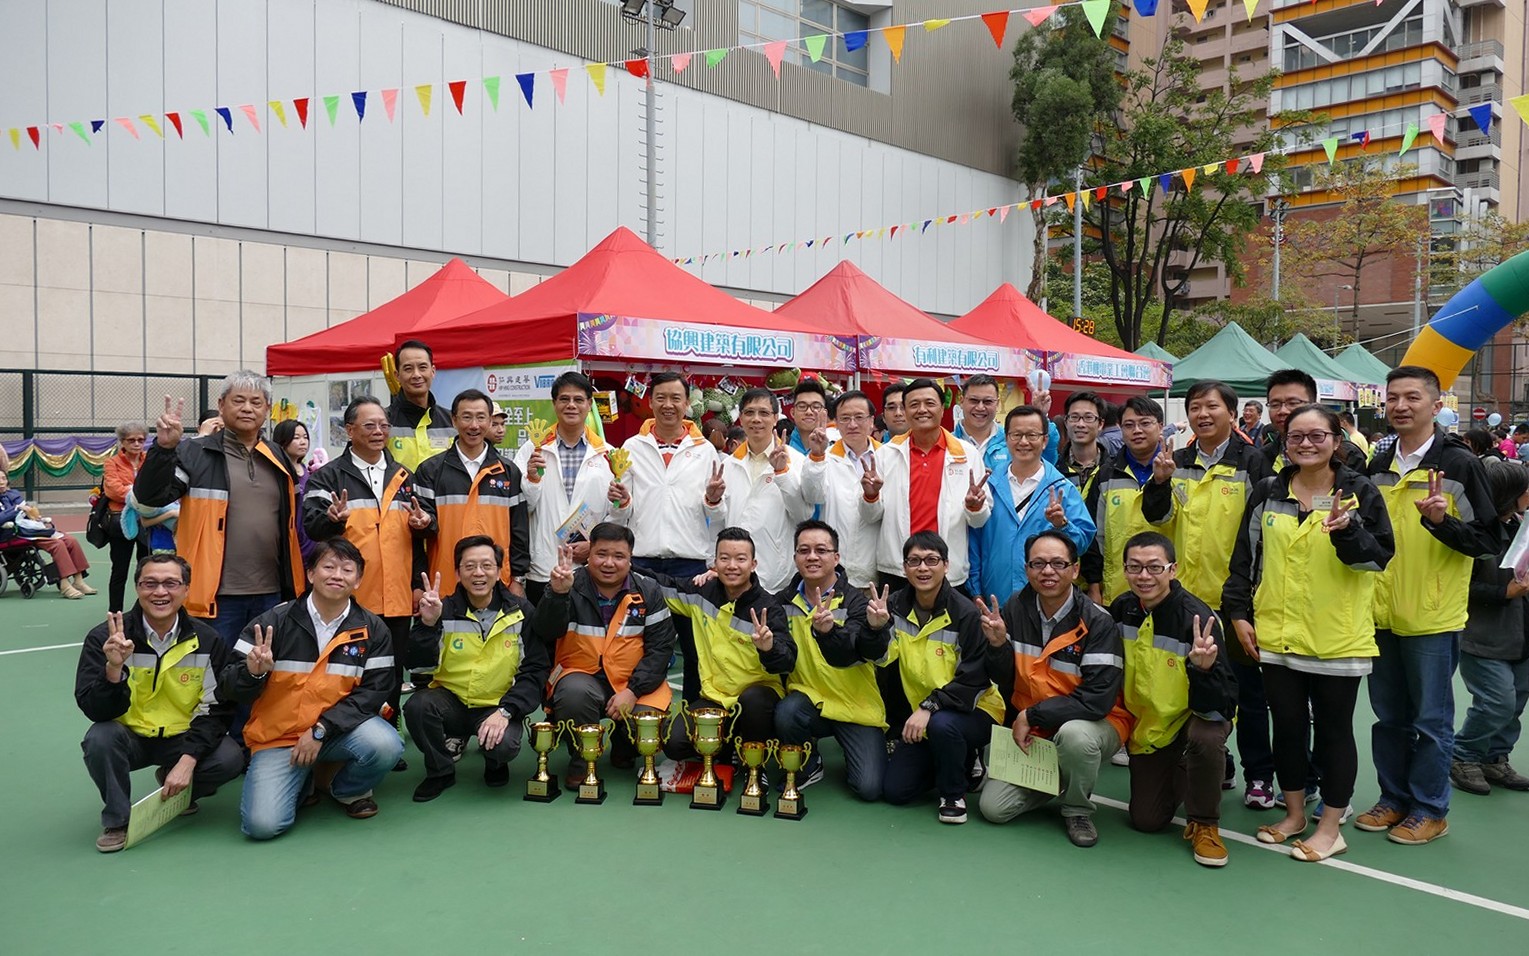 Hip Hing and Vibro will continue to promote a strong health and safety culture